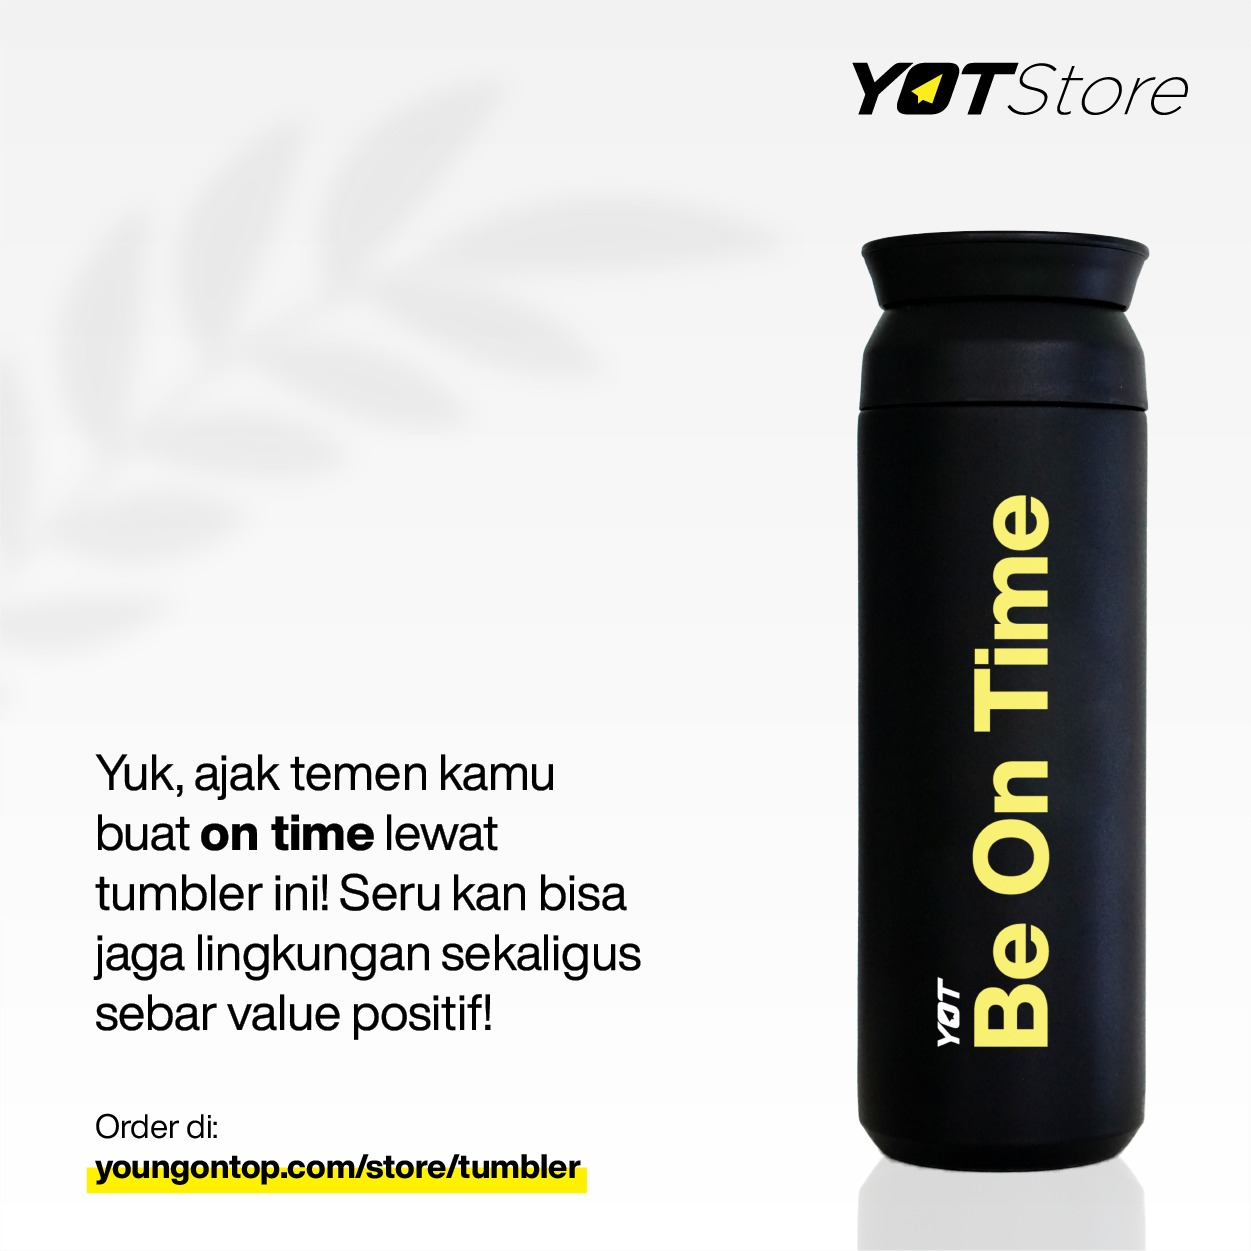 New Tumbler Young On Top YOT Store Be On Time